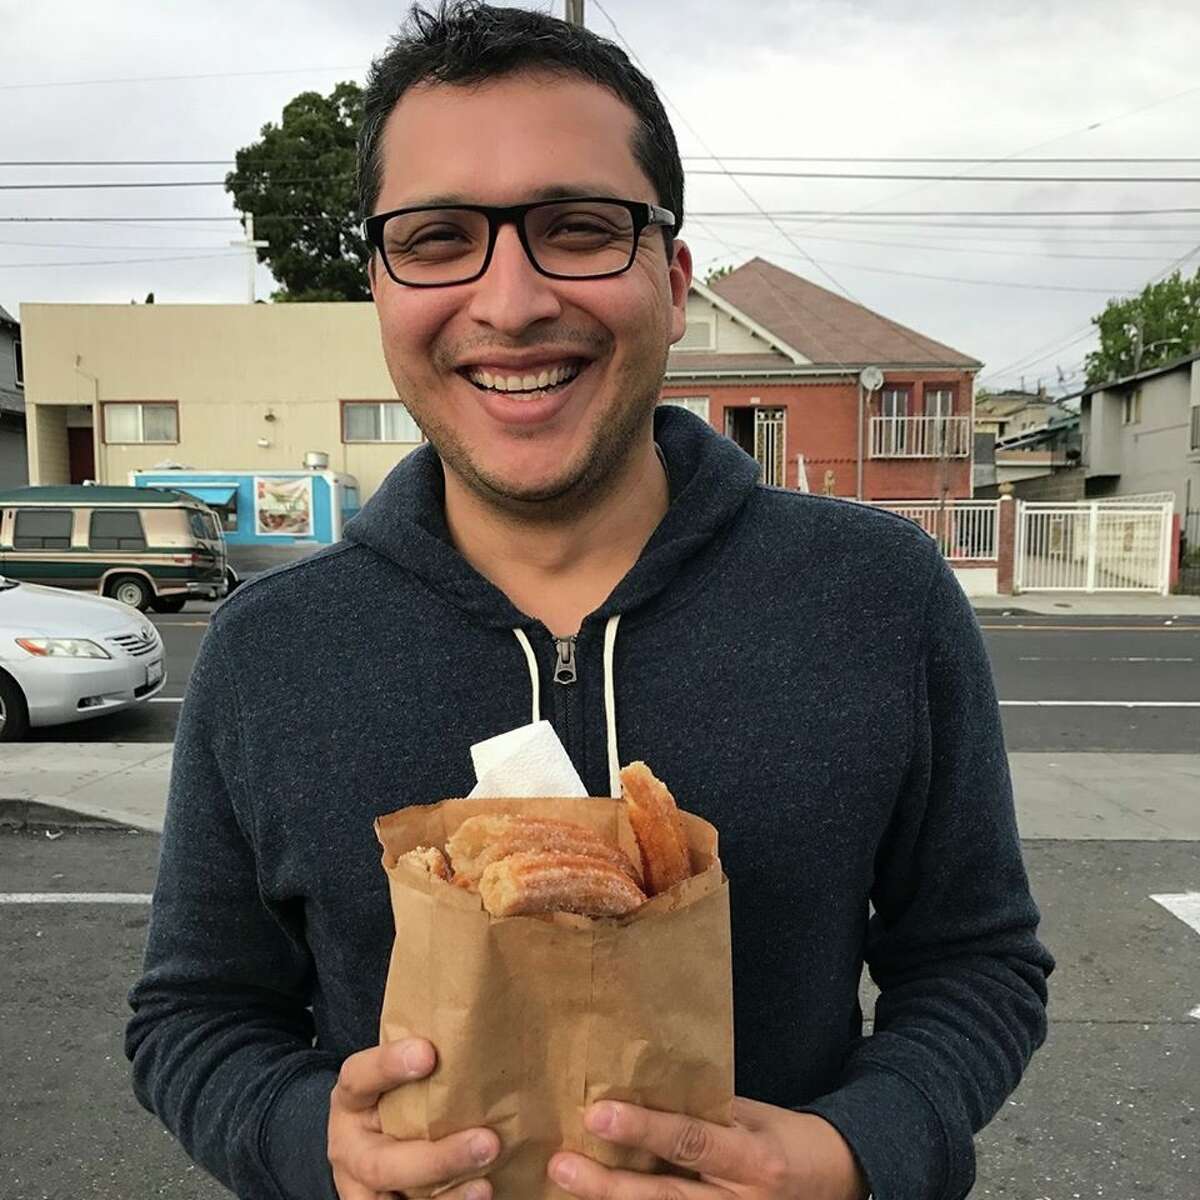 Photographer Eddie Hernandez calls this candid photo of himself, taken by his girlfriend, a good example of how he might capture a client in a dating app profile photo. "I would make sure to use a caption to provide additional context i.e., I know where to find the best churros in all the Bay Area," Hernandez said. See the next three photos for more examples of what Hernandez recommends in profile pics.